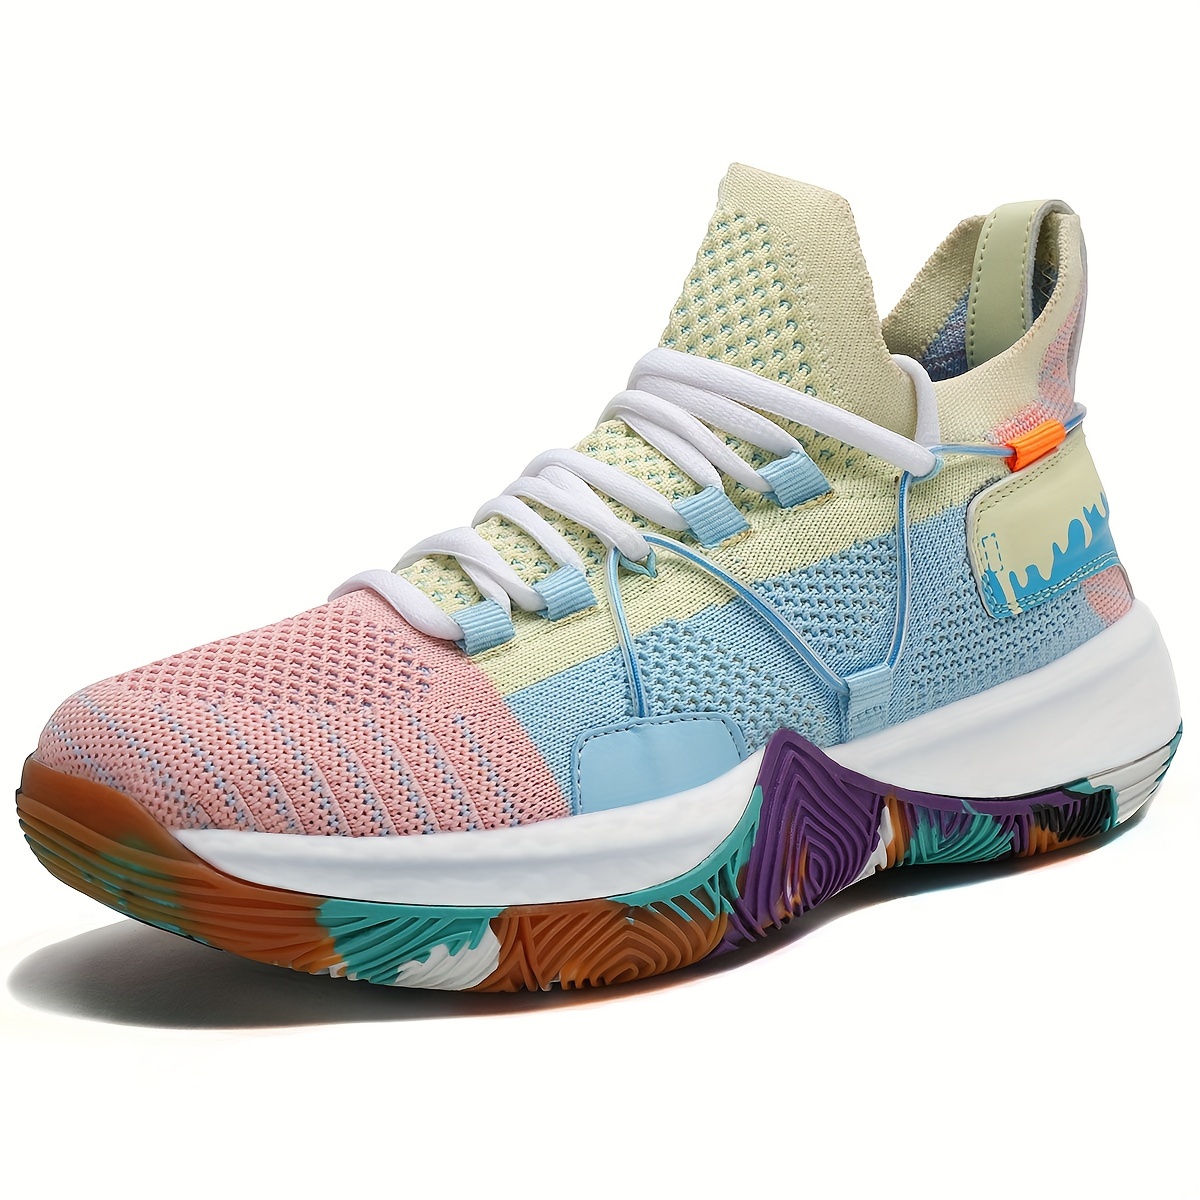 

Women's Basketball Shoes With Arch Support, Trendy Colorful Running Walking Tennis Shoes, Breathable Platform Sneakers